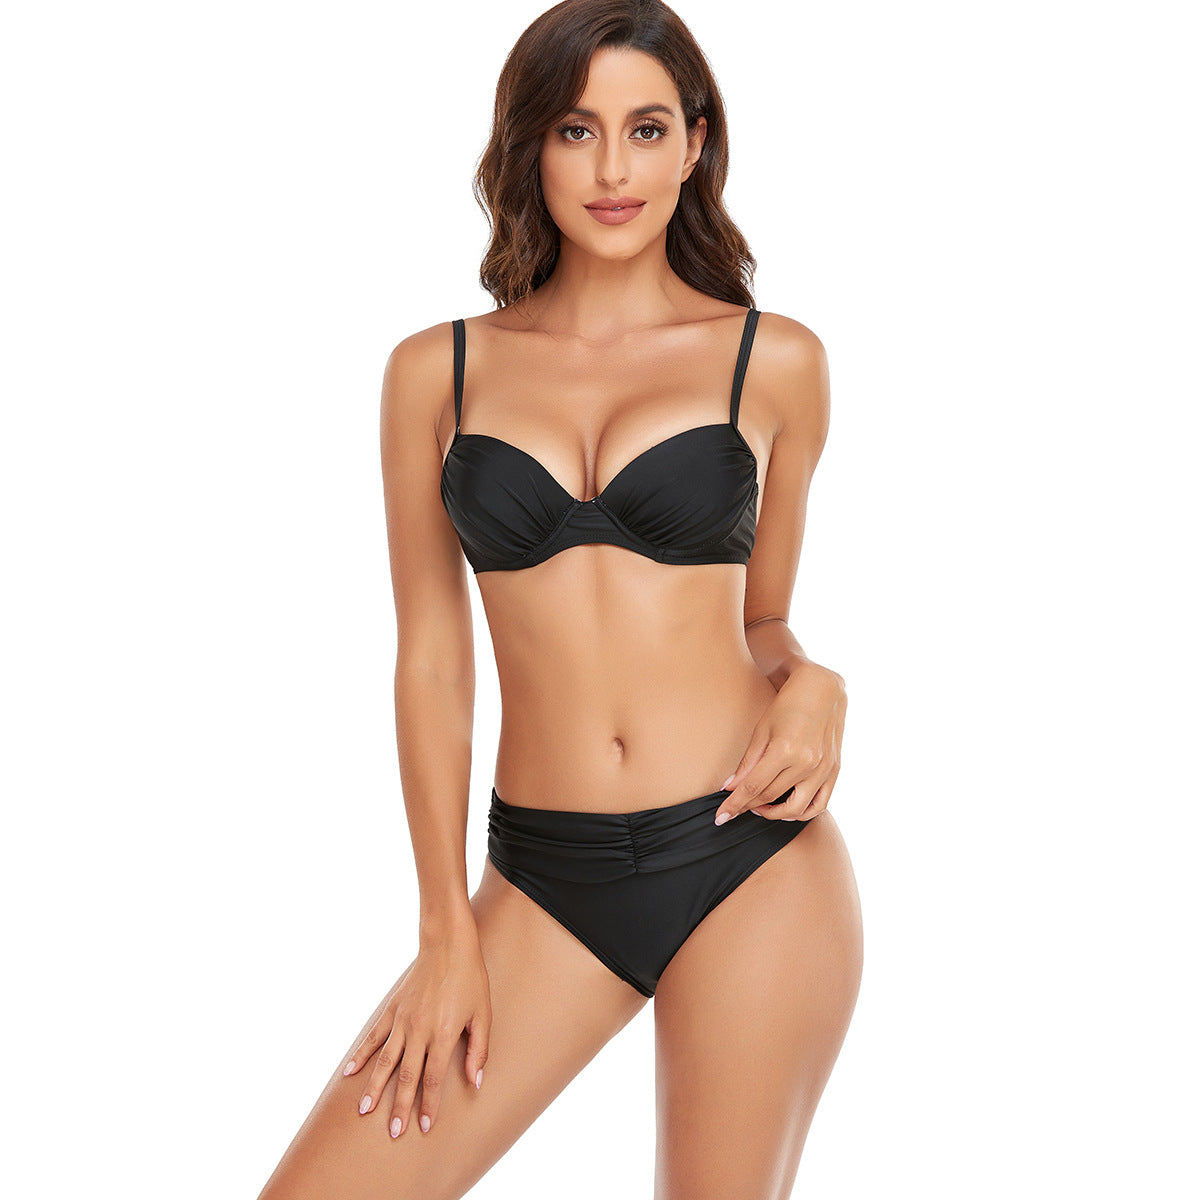 Classic Black Bikini with Ruched Bottoms Red